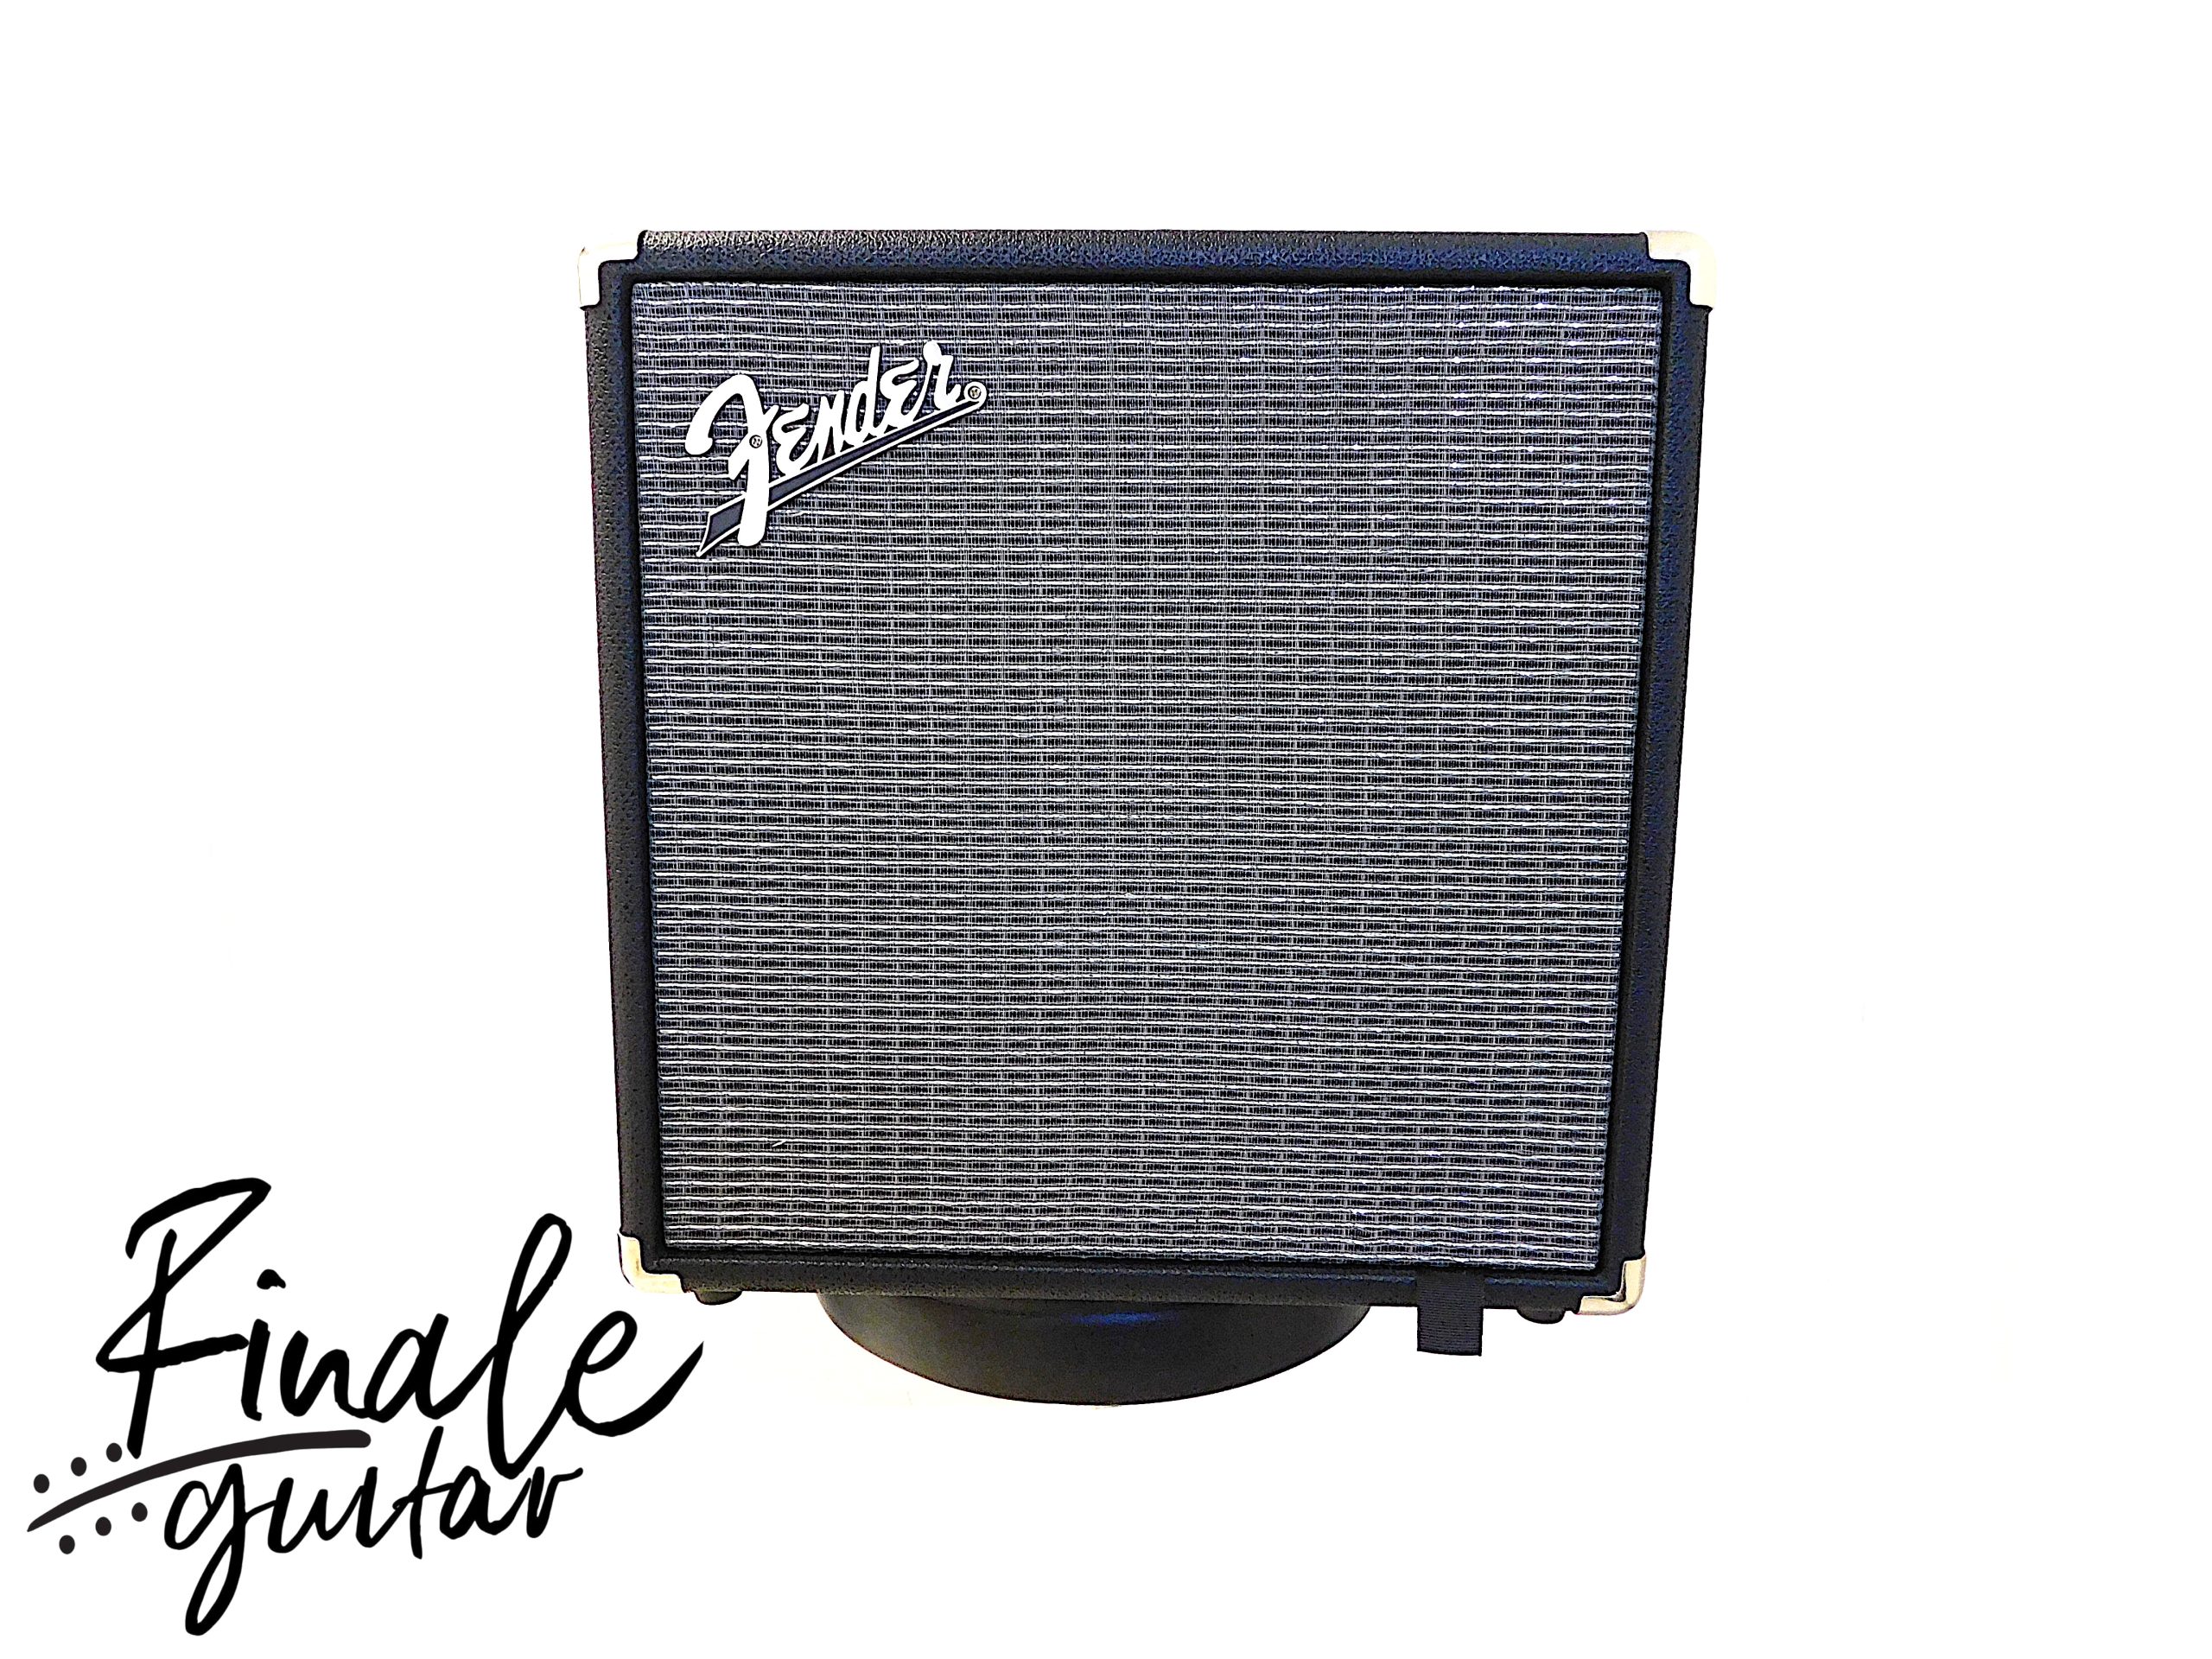 Fender Rumble 25 bass amp for sale in our Sheffield guitar shop, Finale Guitar